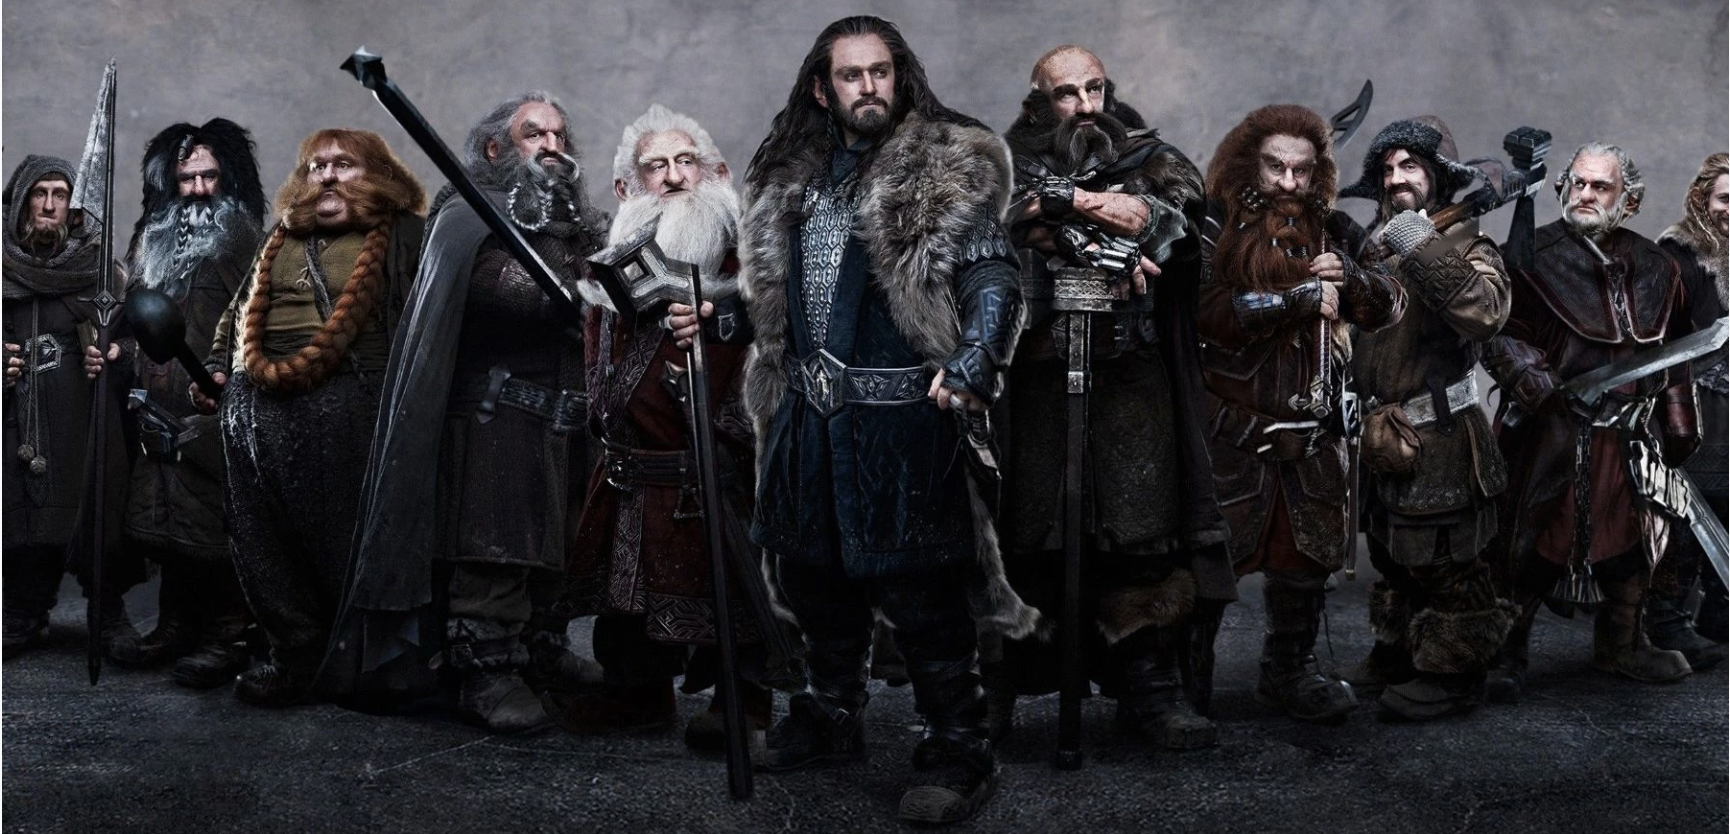 13 dwarves from the hobbit